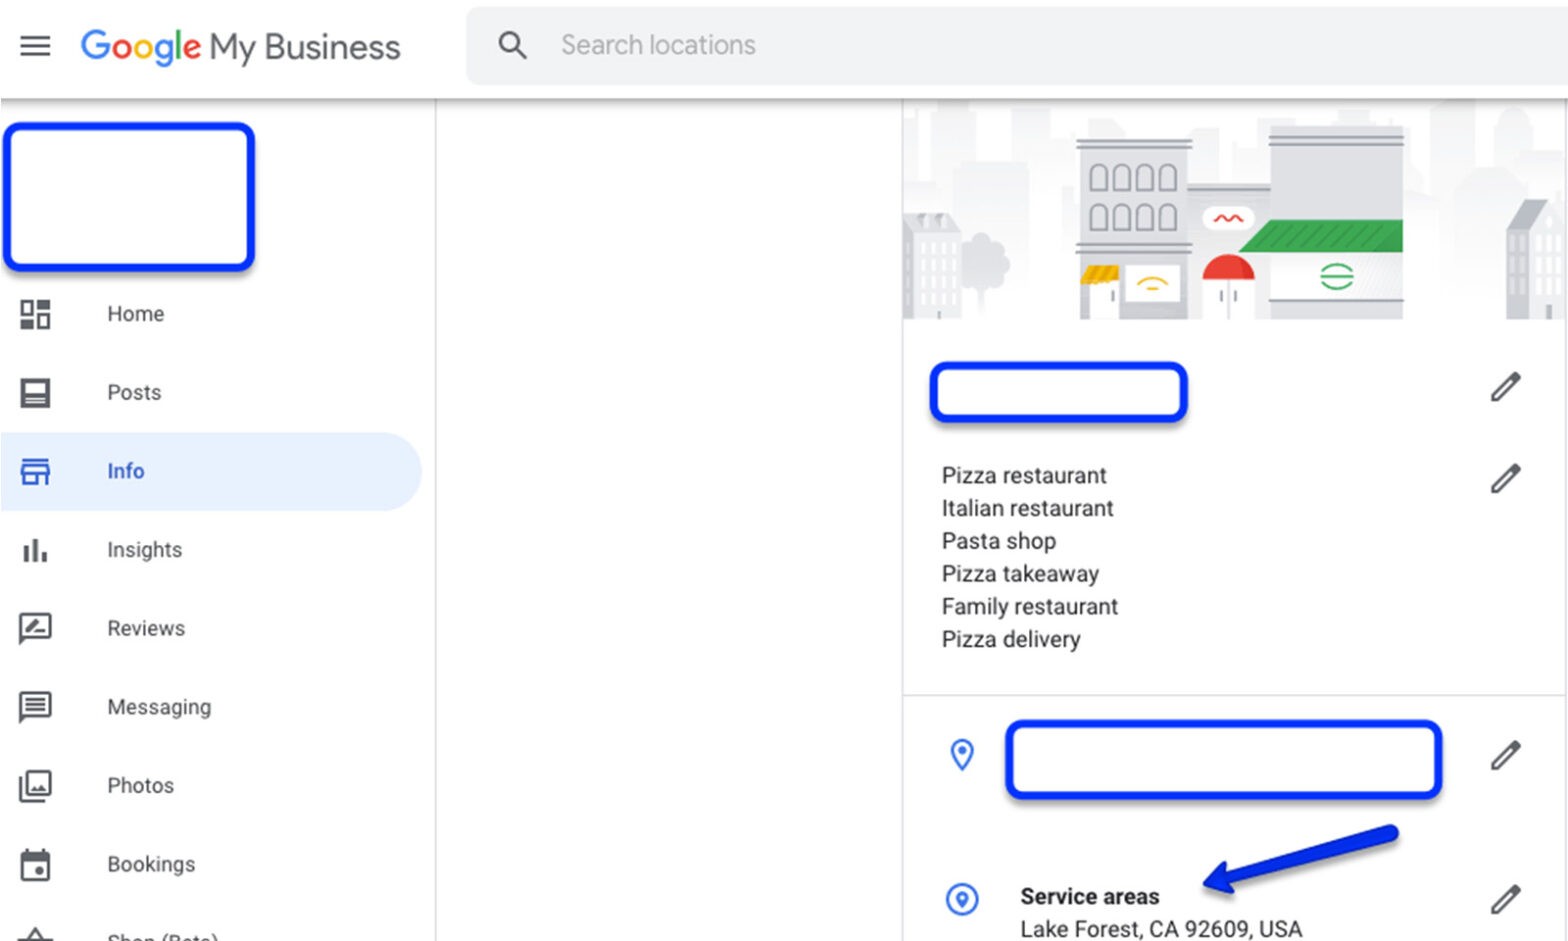 Featured image for post: Google Business Profile now limits service area zips to 20 max